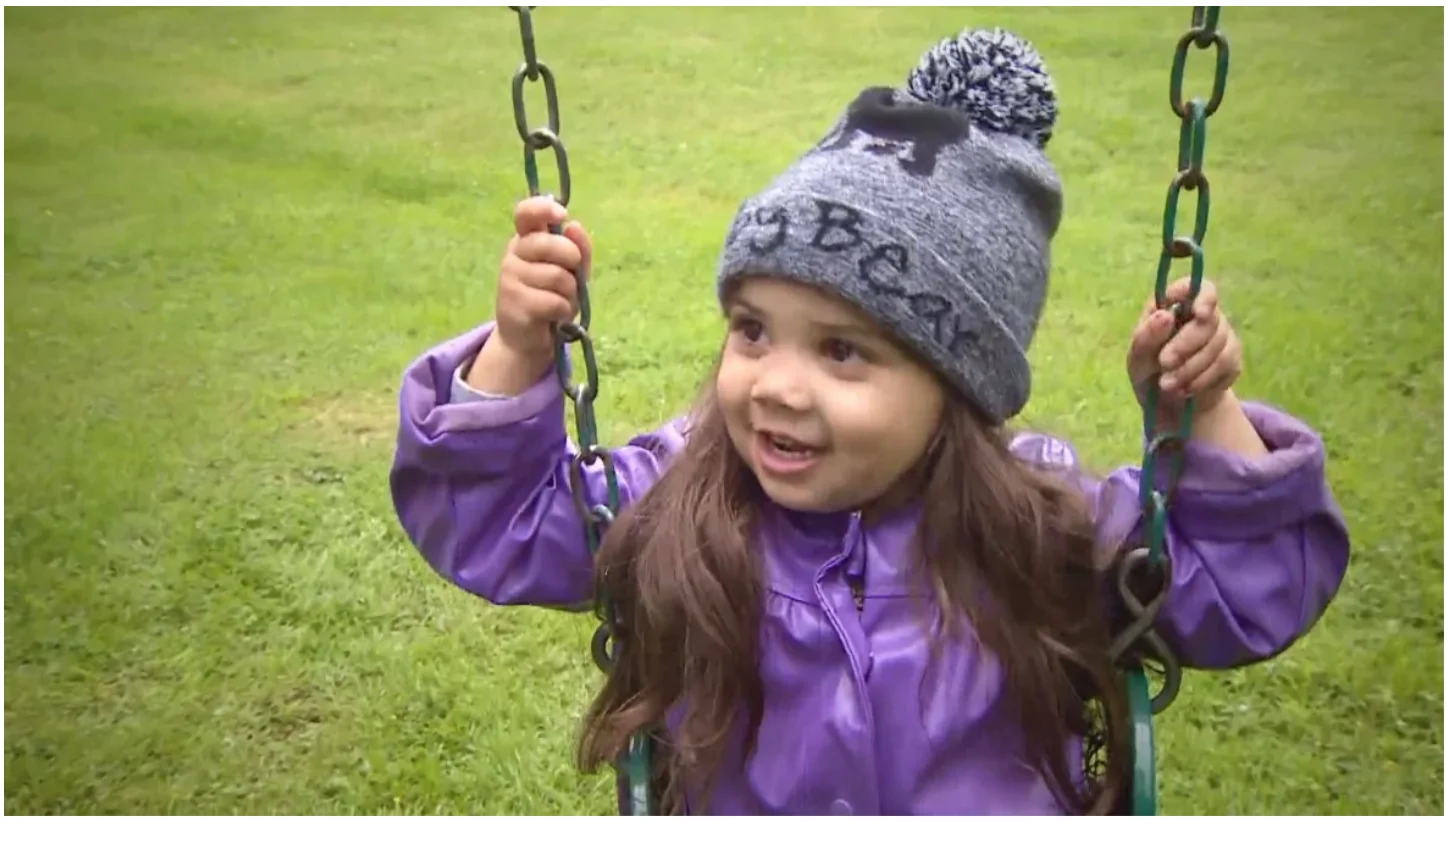 After a few days in the hospital struggling against paralysis caused by a tick, Malia Radmore is back to health and happy to swing in her yard. (Jim Mulleder/CBC)